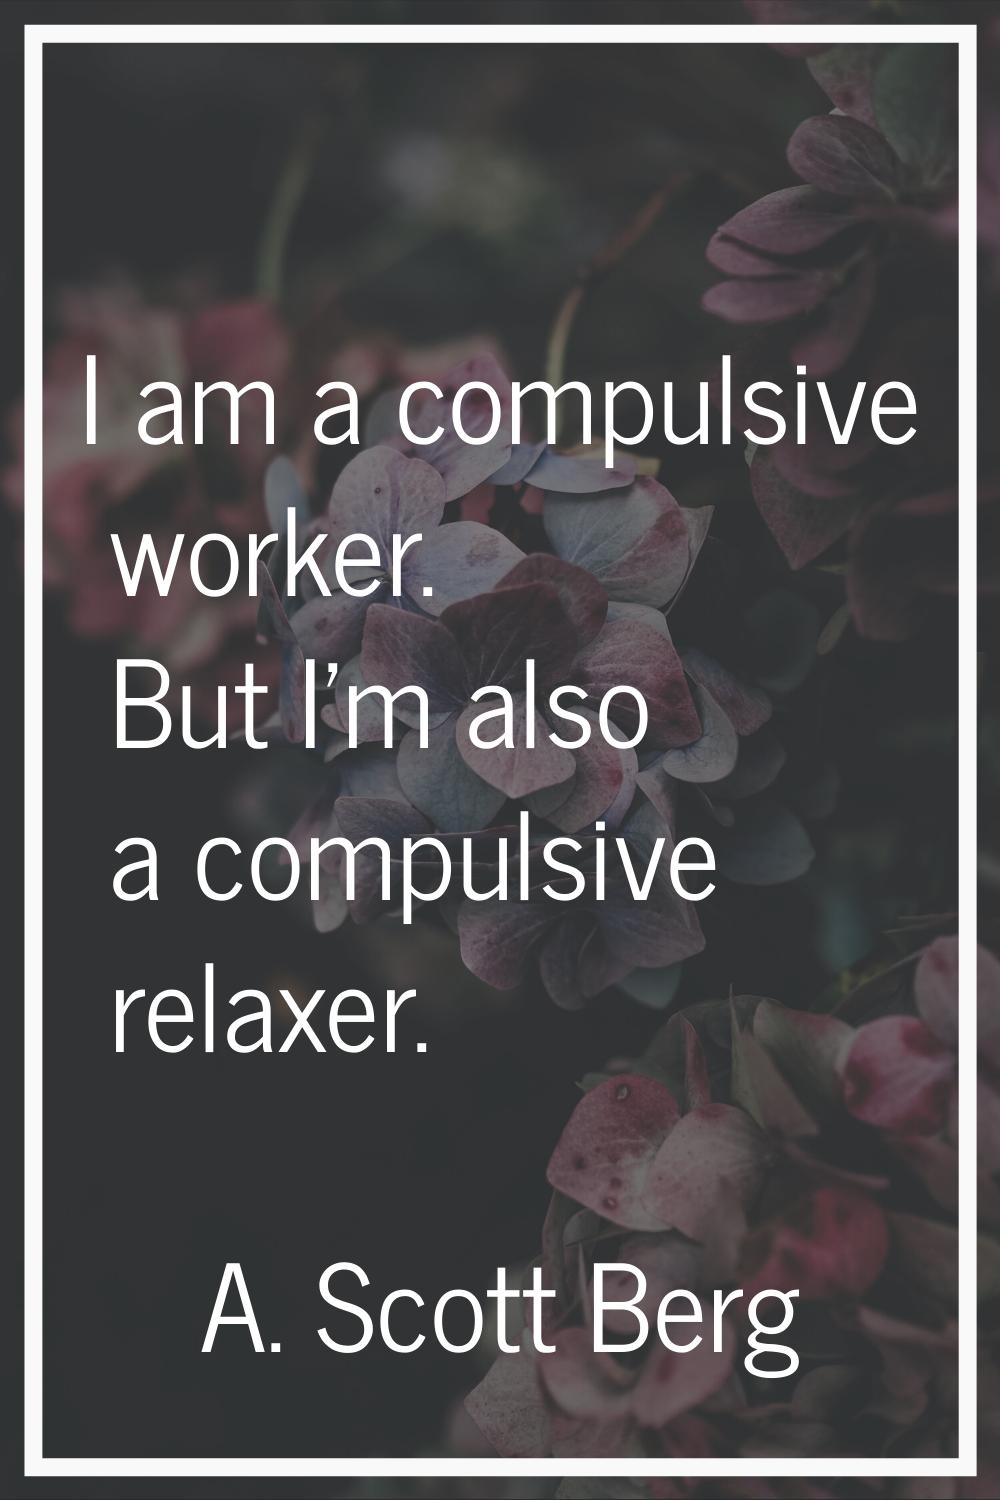 I am a compulsive worker. But I'm also a compulsive relaxer.